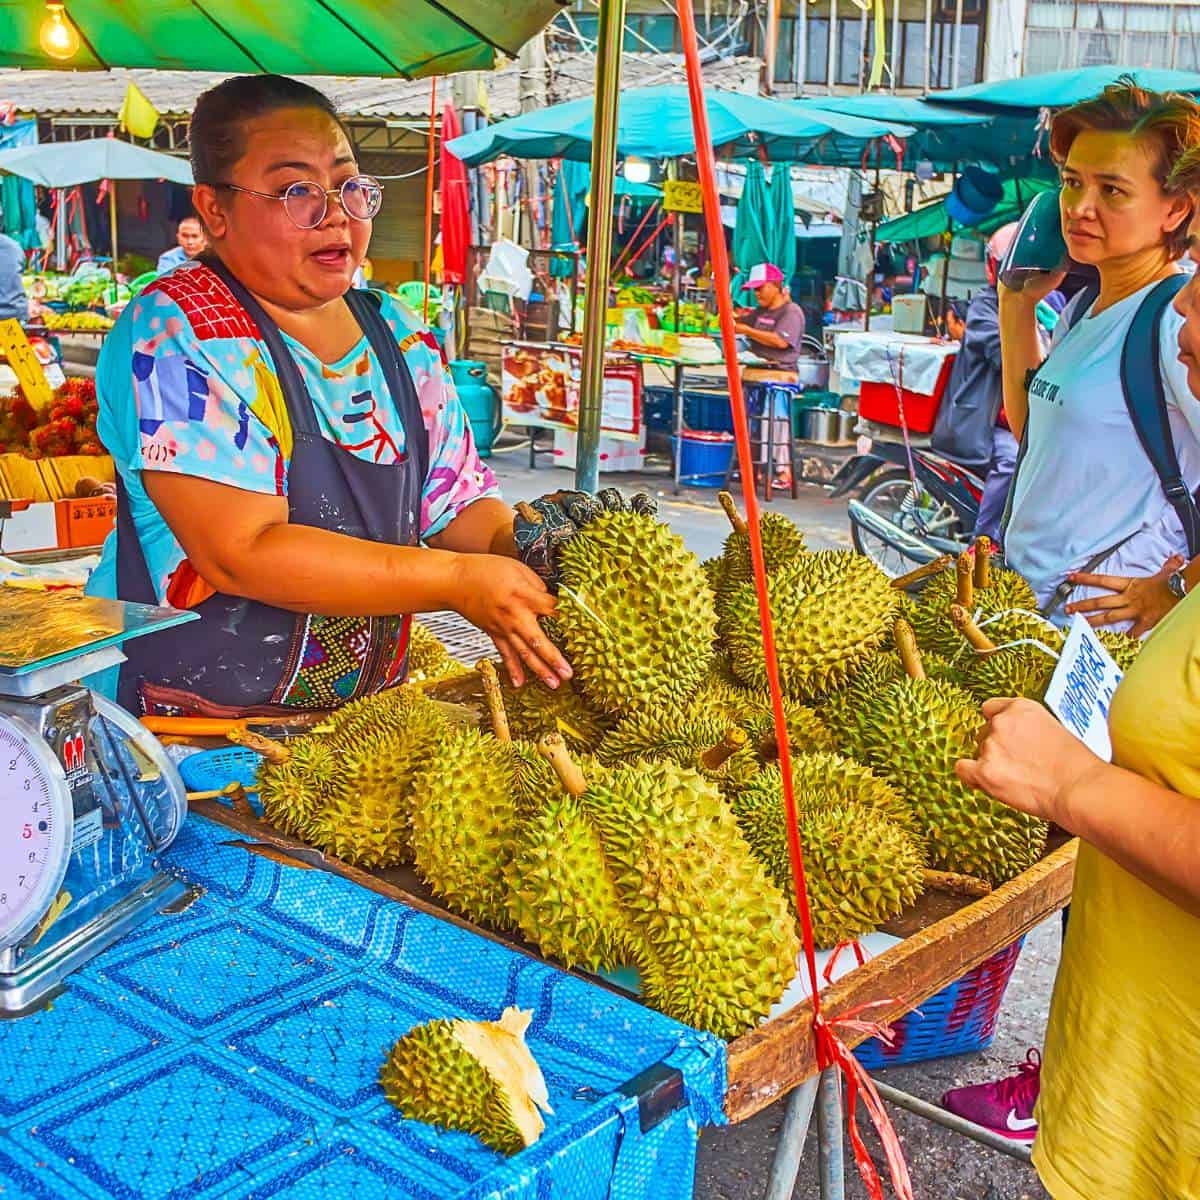 A woman is selling durians at an outdoor market.